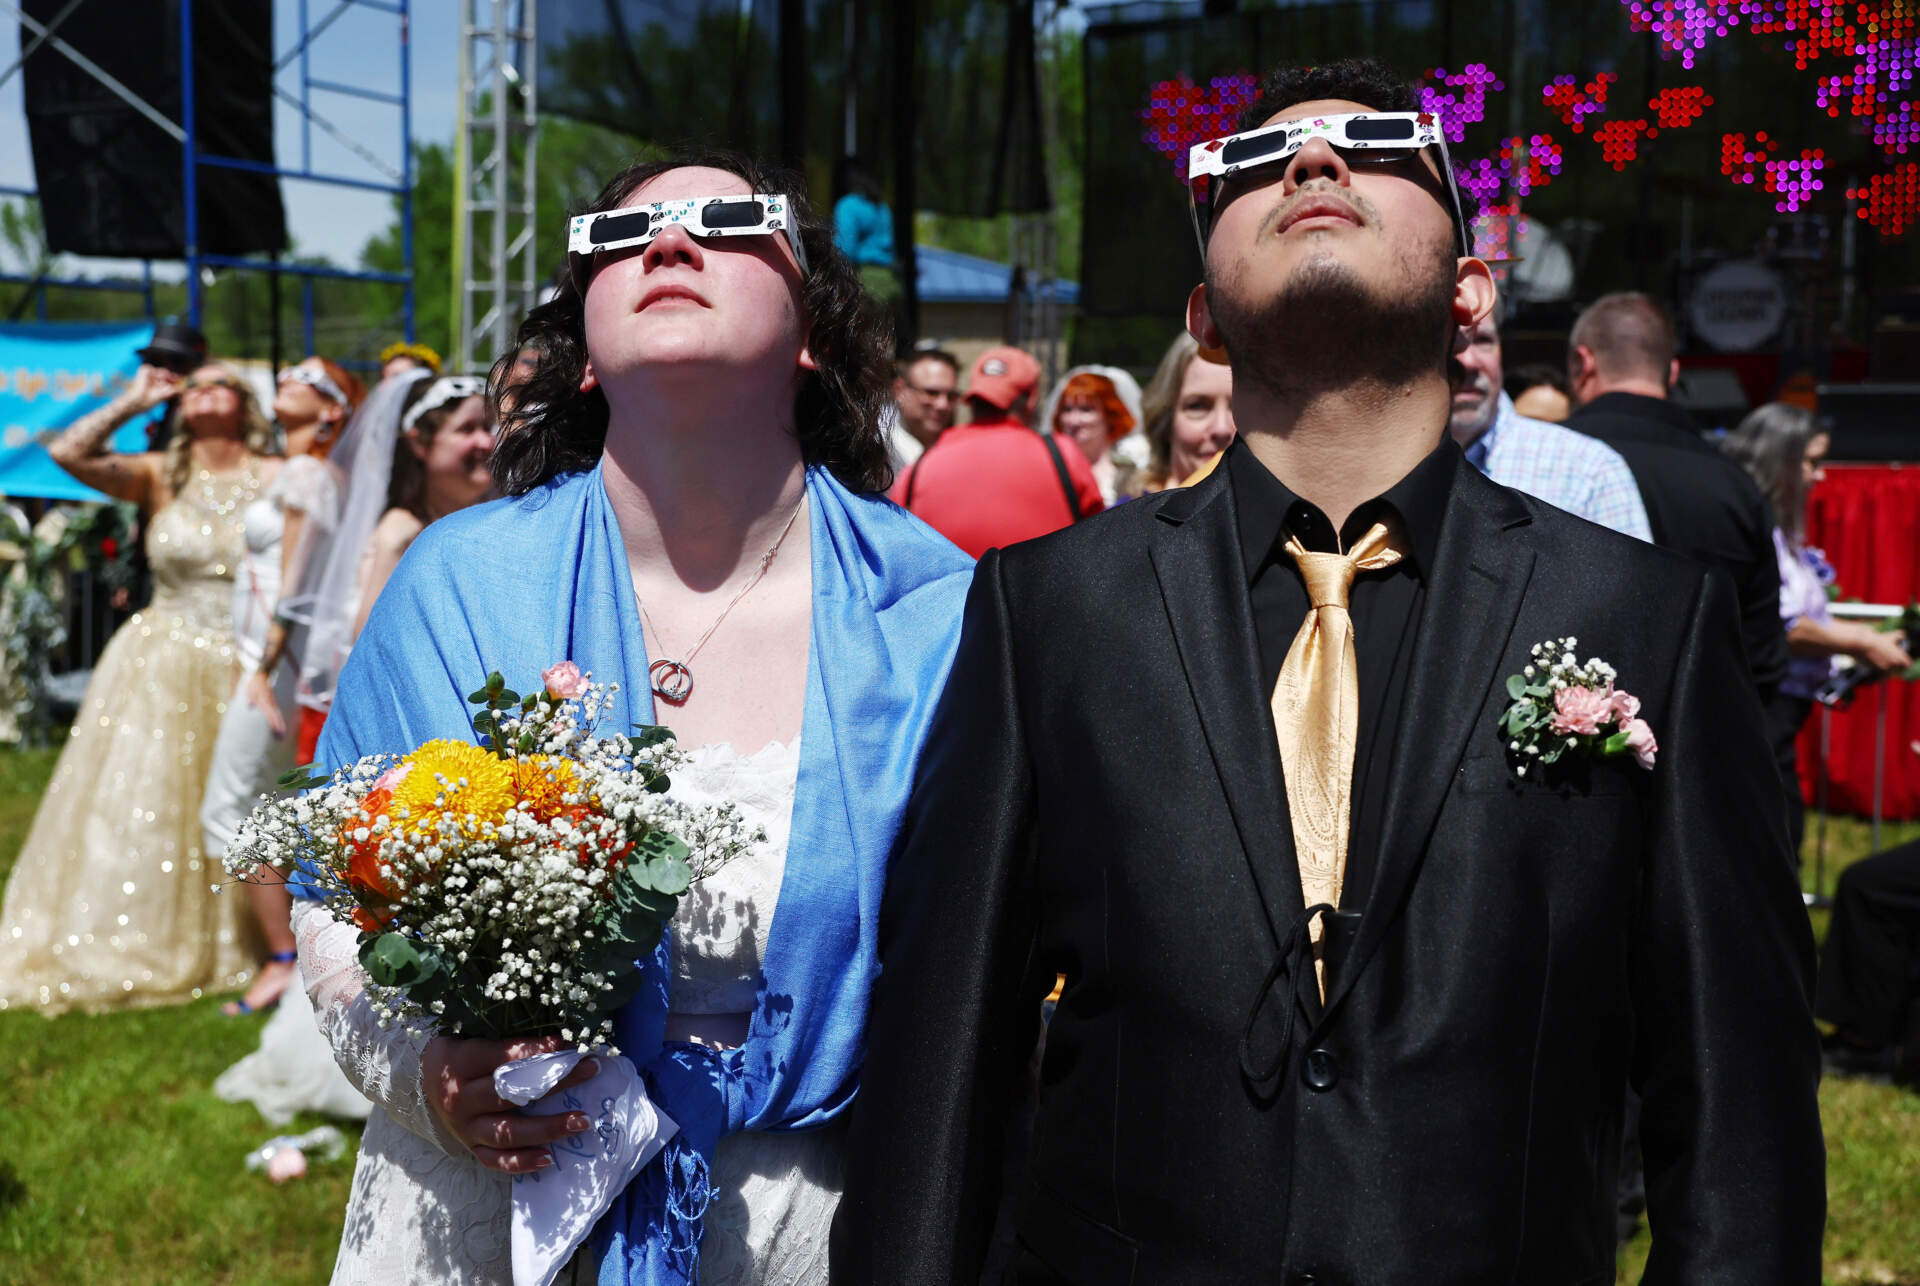 Couples view the solar eclipse during a mass wedding at the Total Eclipse of the Heart festival in Russellville, Arkansas. (Mario Tama/Getty Images)